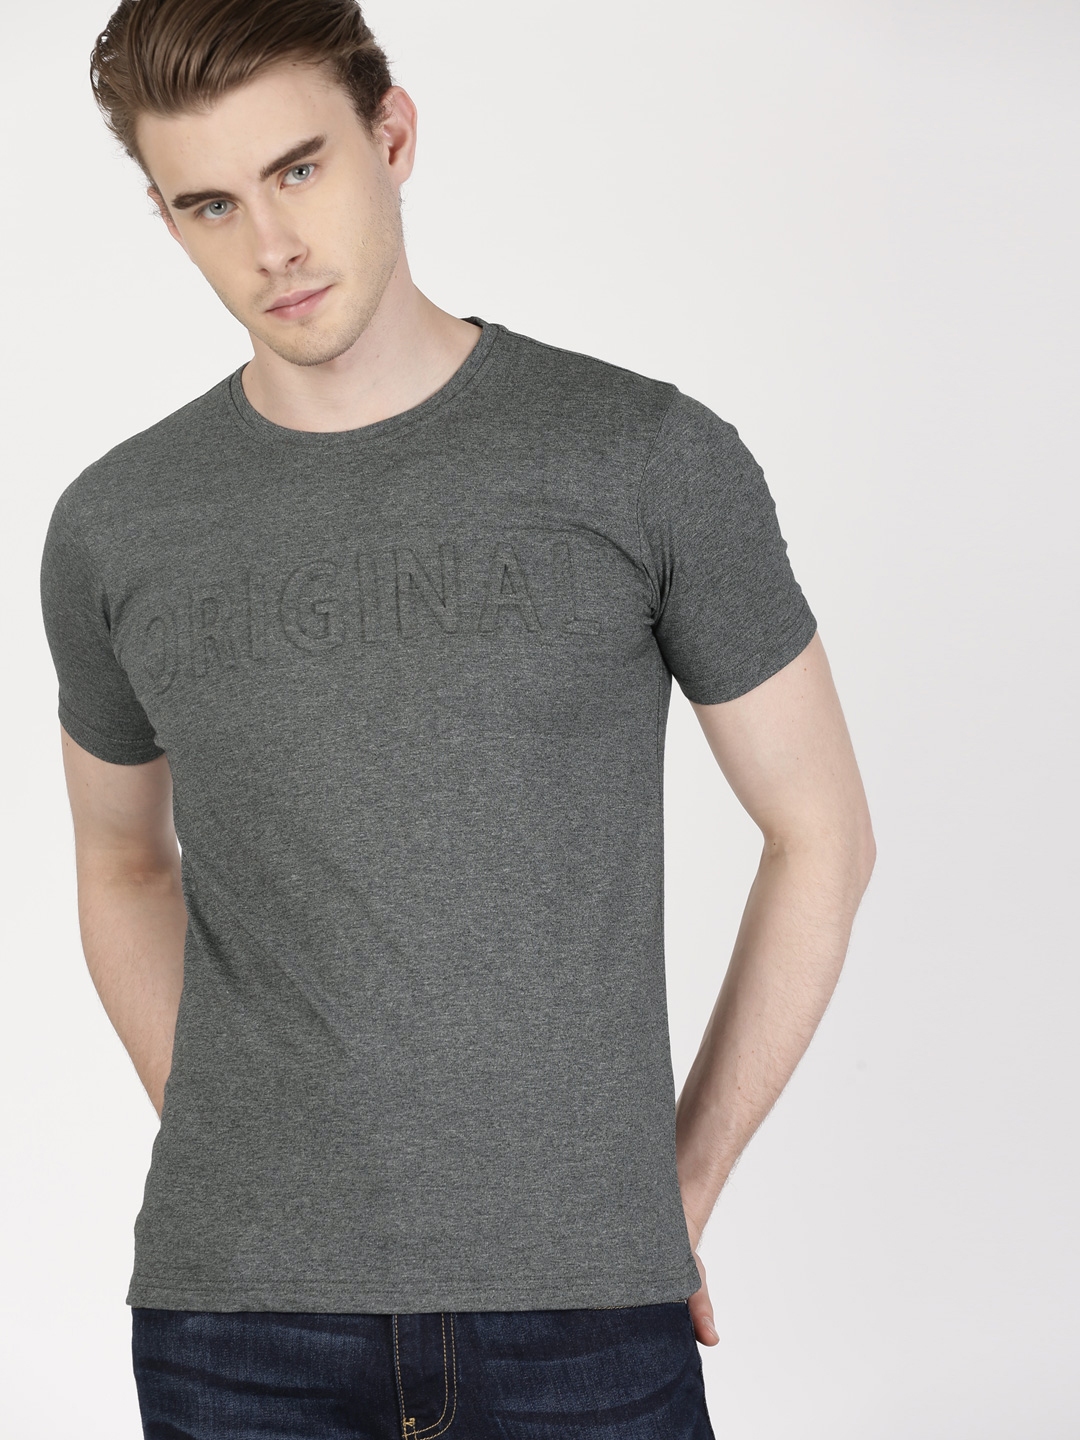 Buy Ether Men Charcoal Grey Round Neck T Shirt With Embossed Print ...